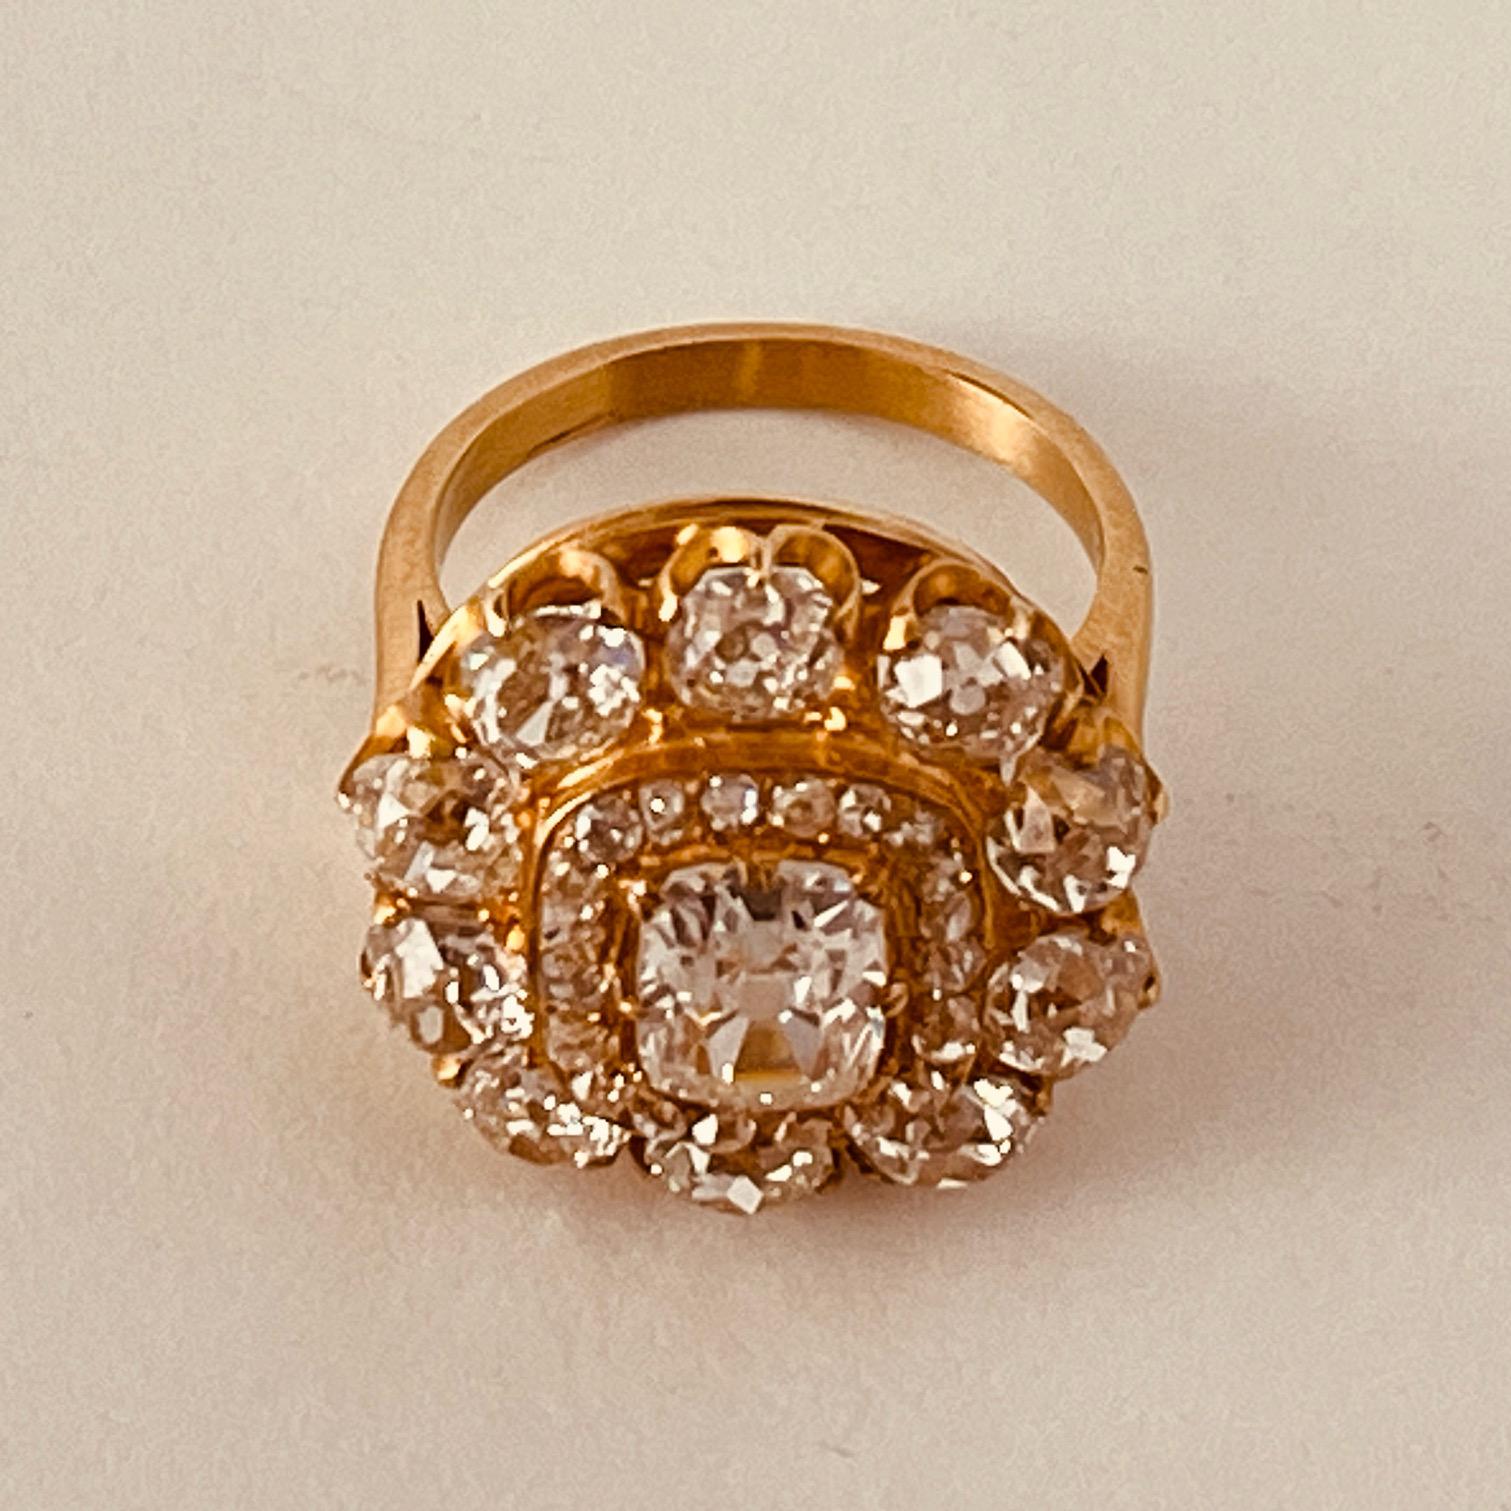 Antique Diamonds Cluster Ring With Central Old-Cut Cushion Weighing 1.35cts For Sale 2